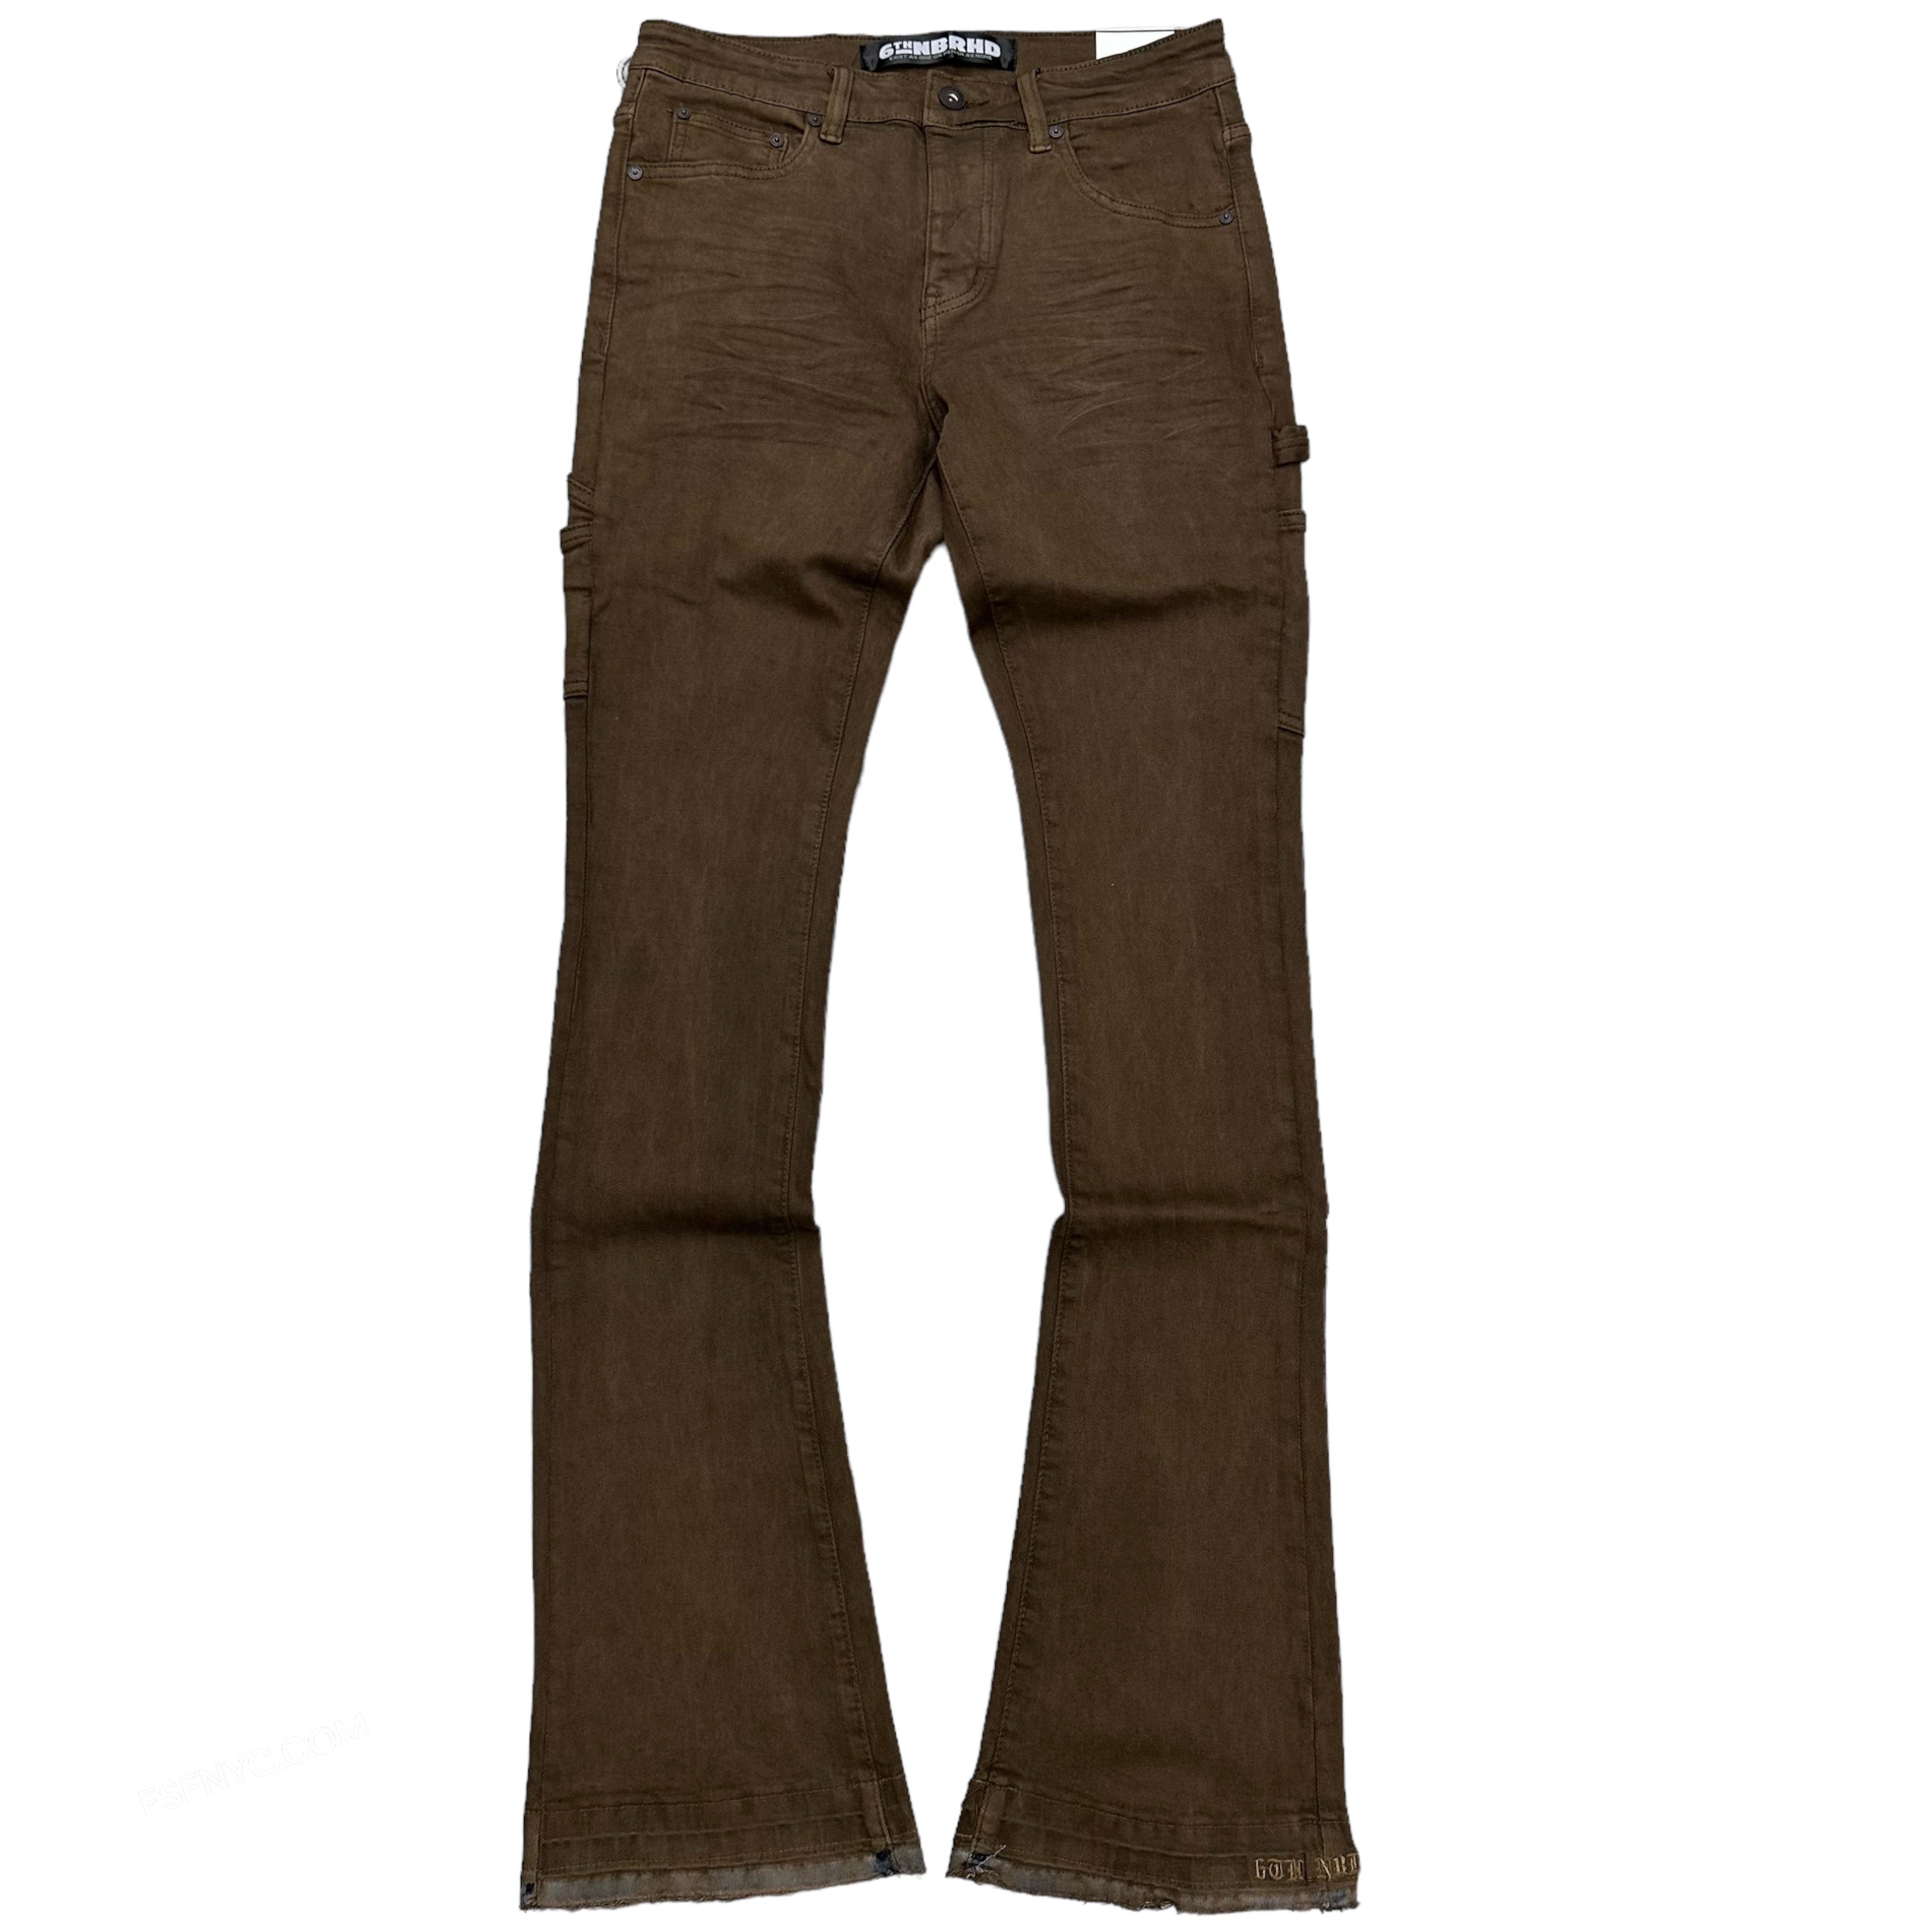 6TH NBRHD StackeD Tradition Brown Denim D2302